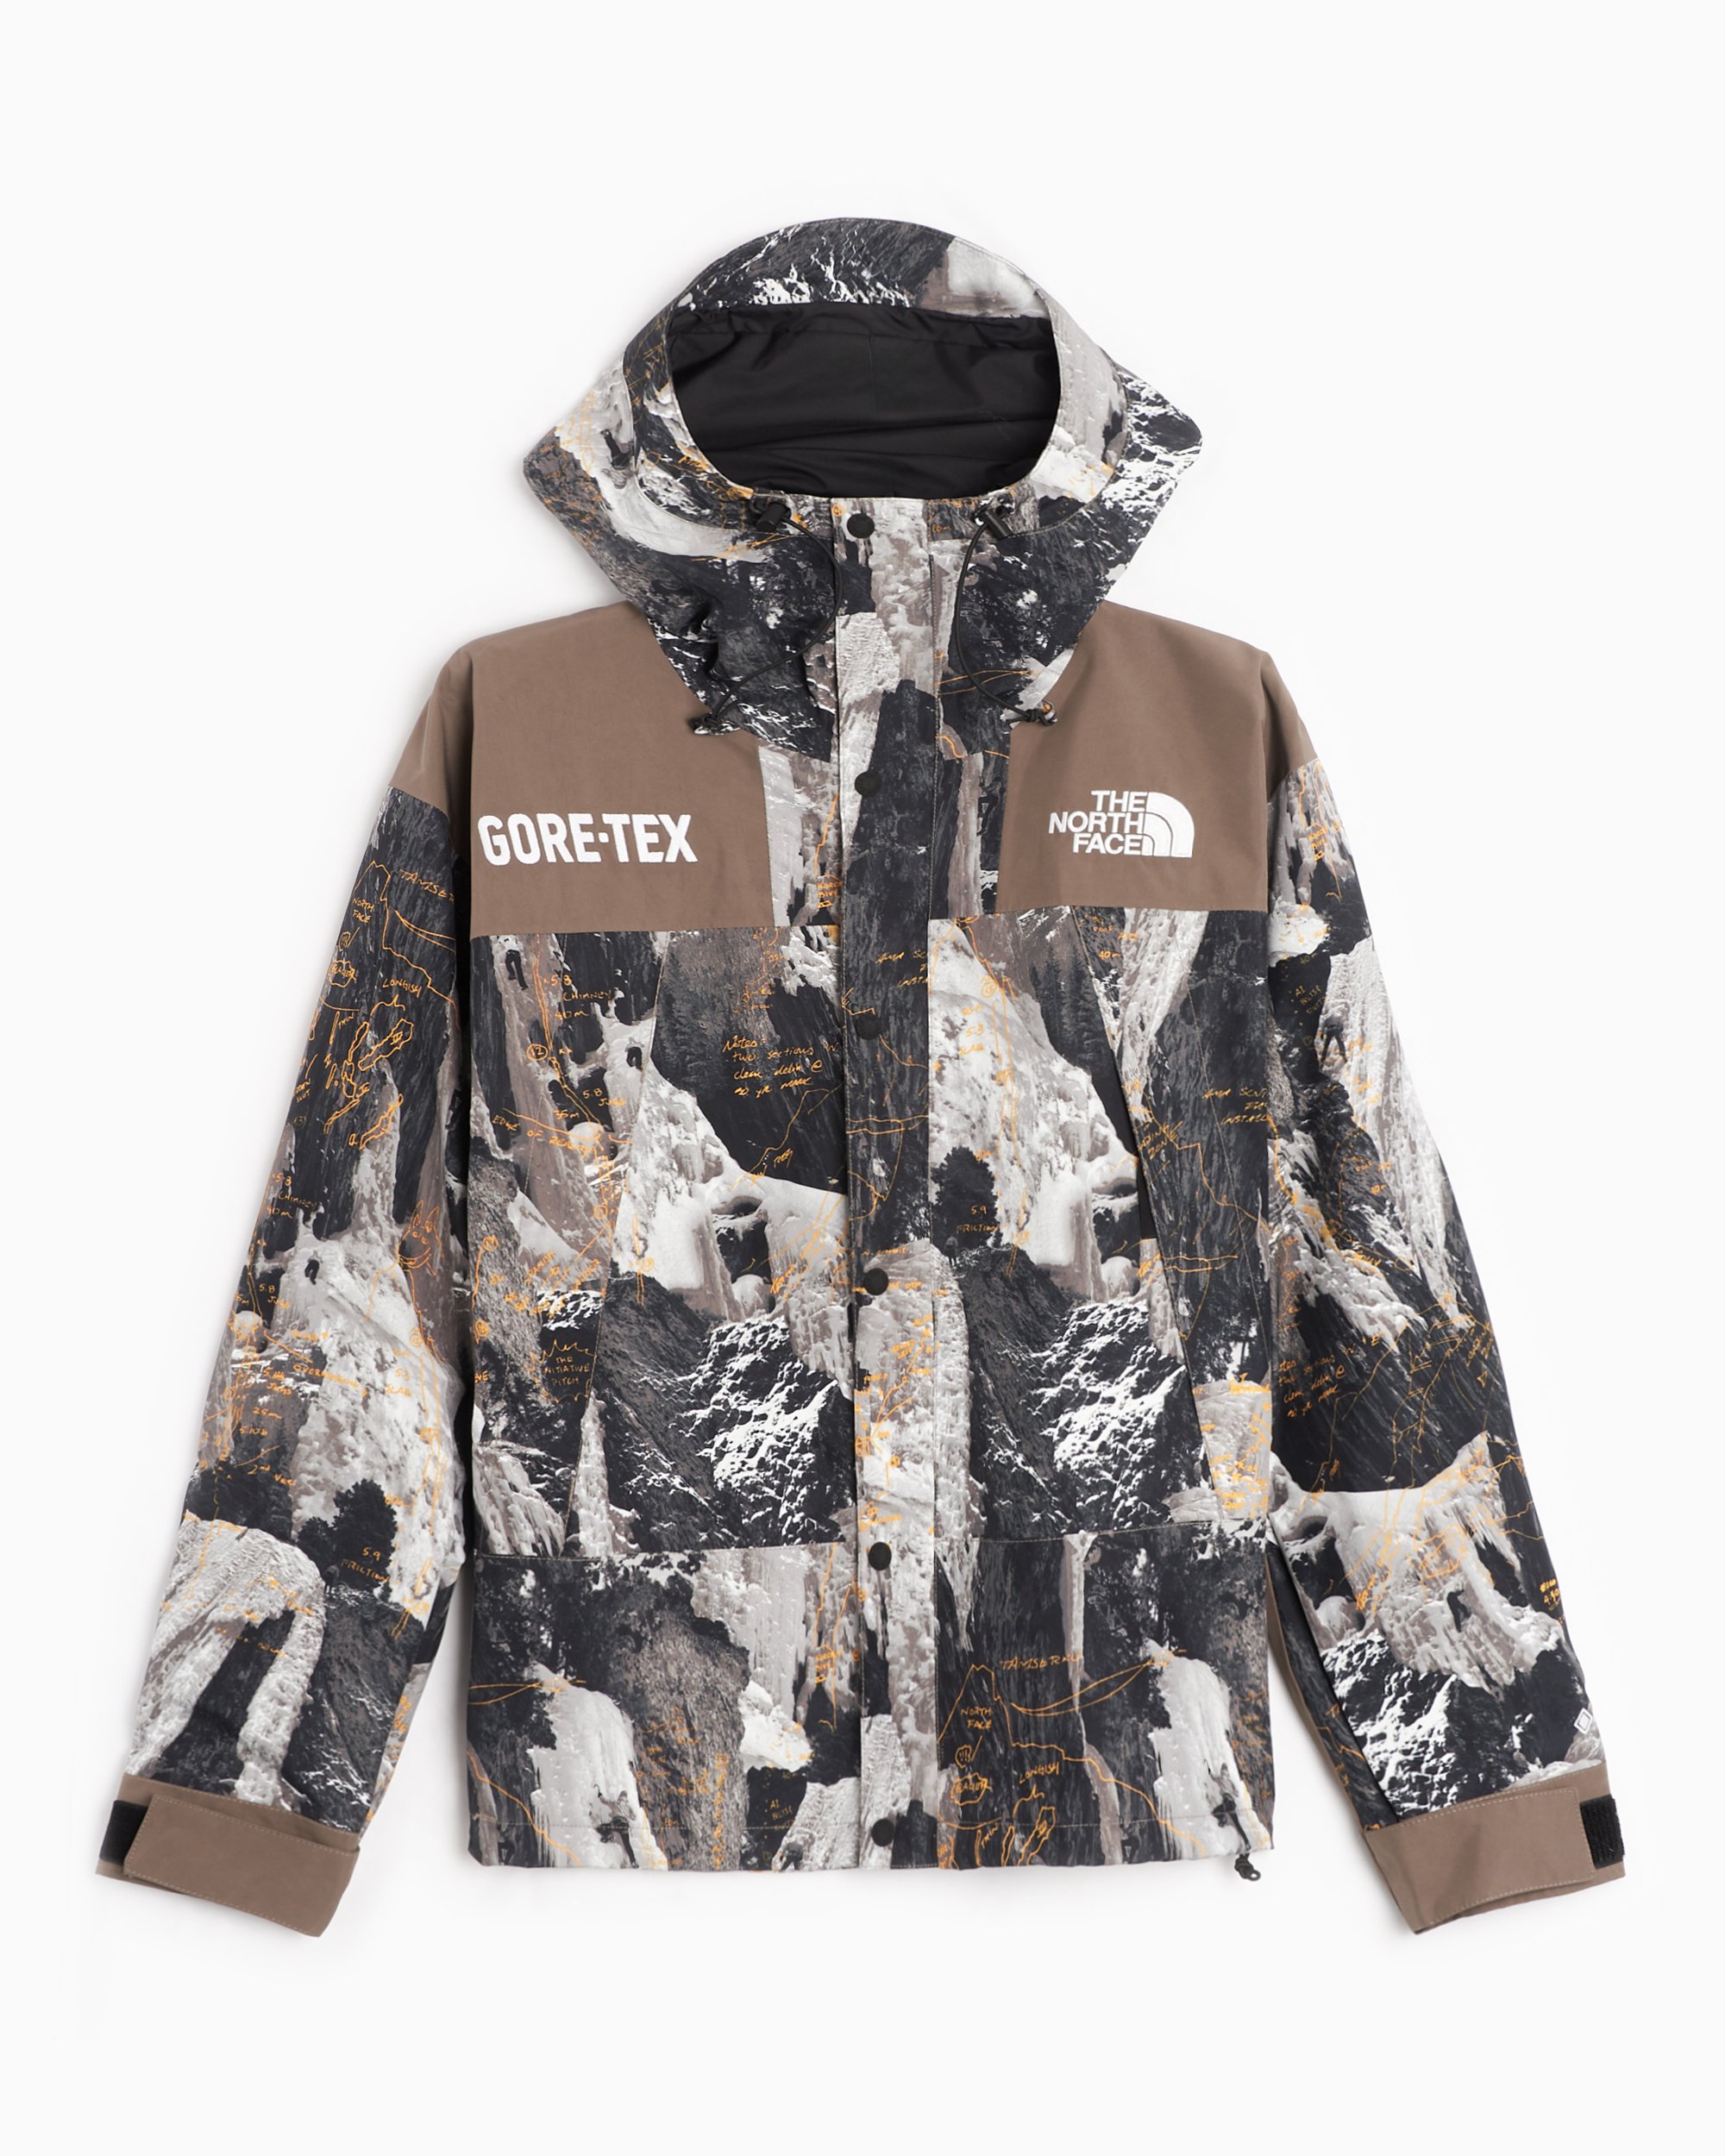 The North Face Men's Gore-Tex Mountain Hooded Jacket Brown